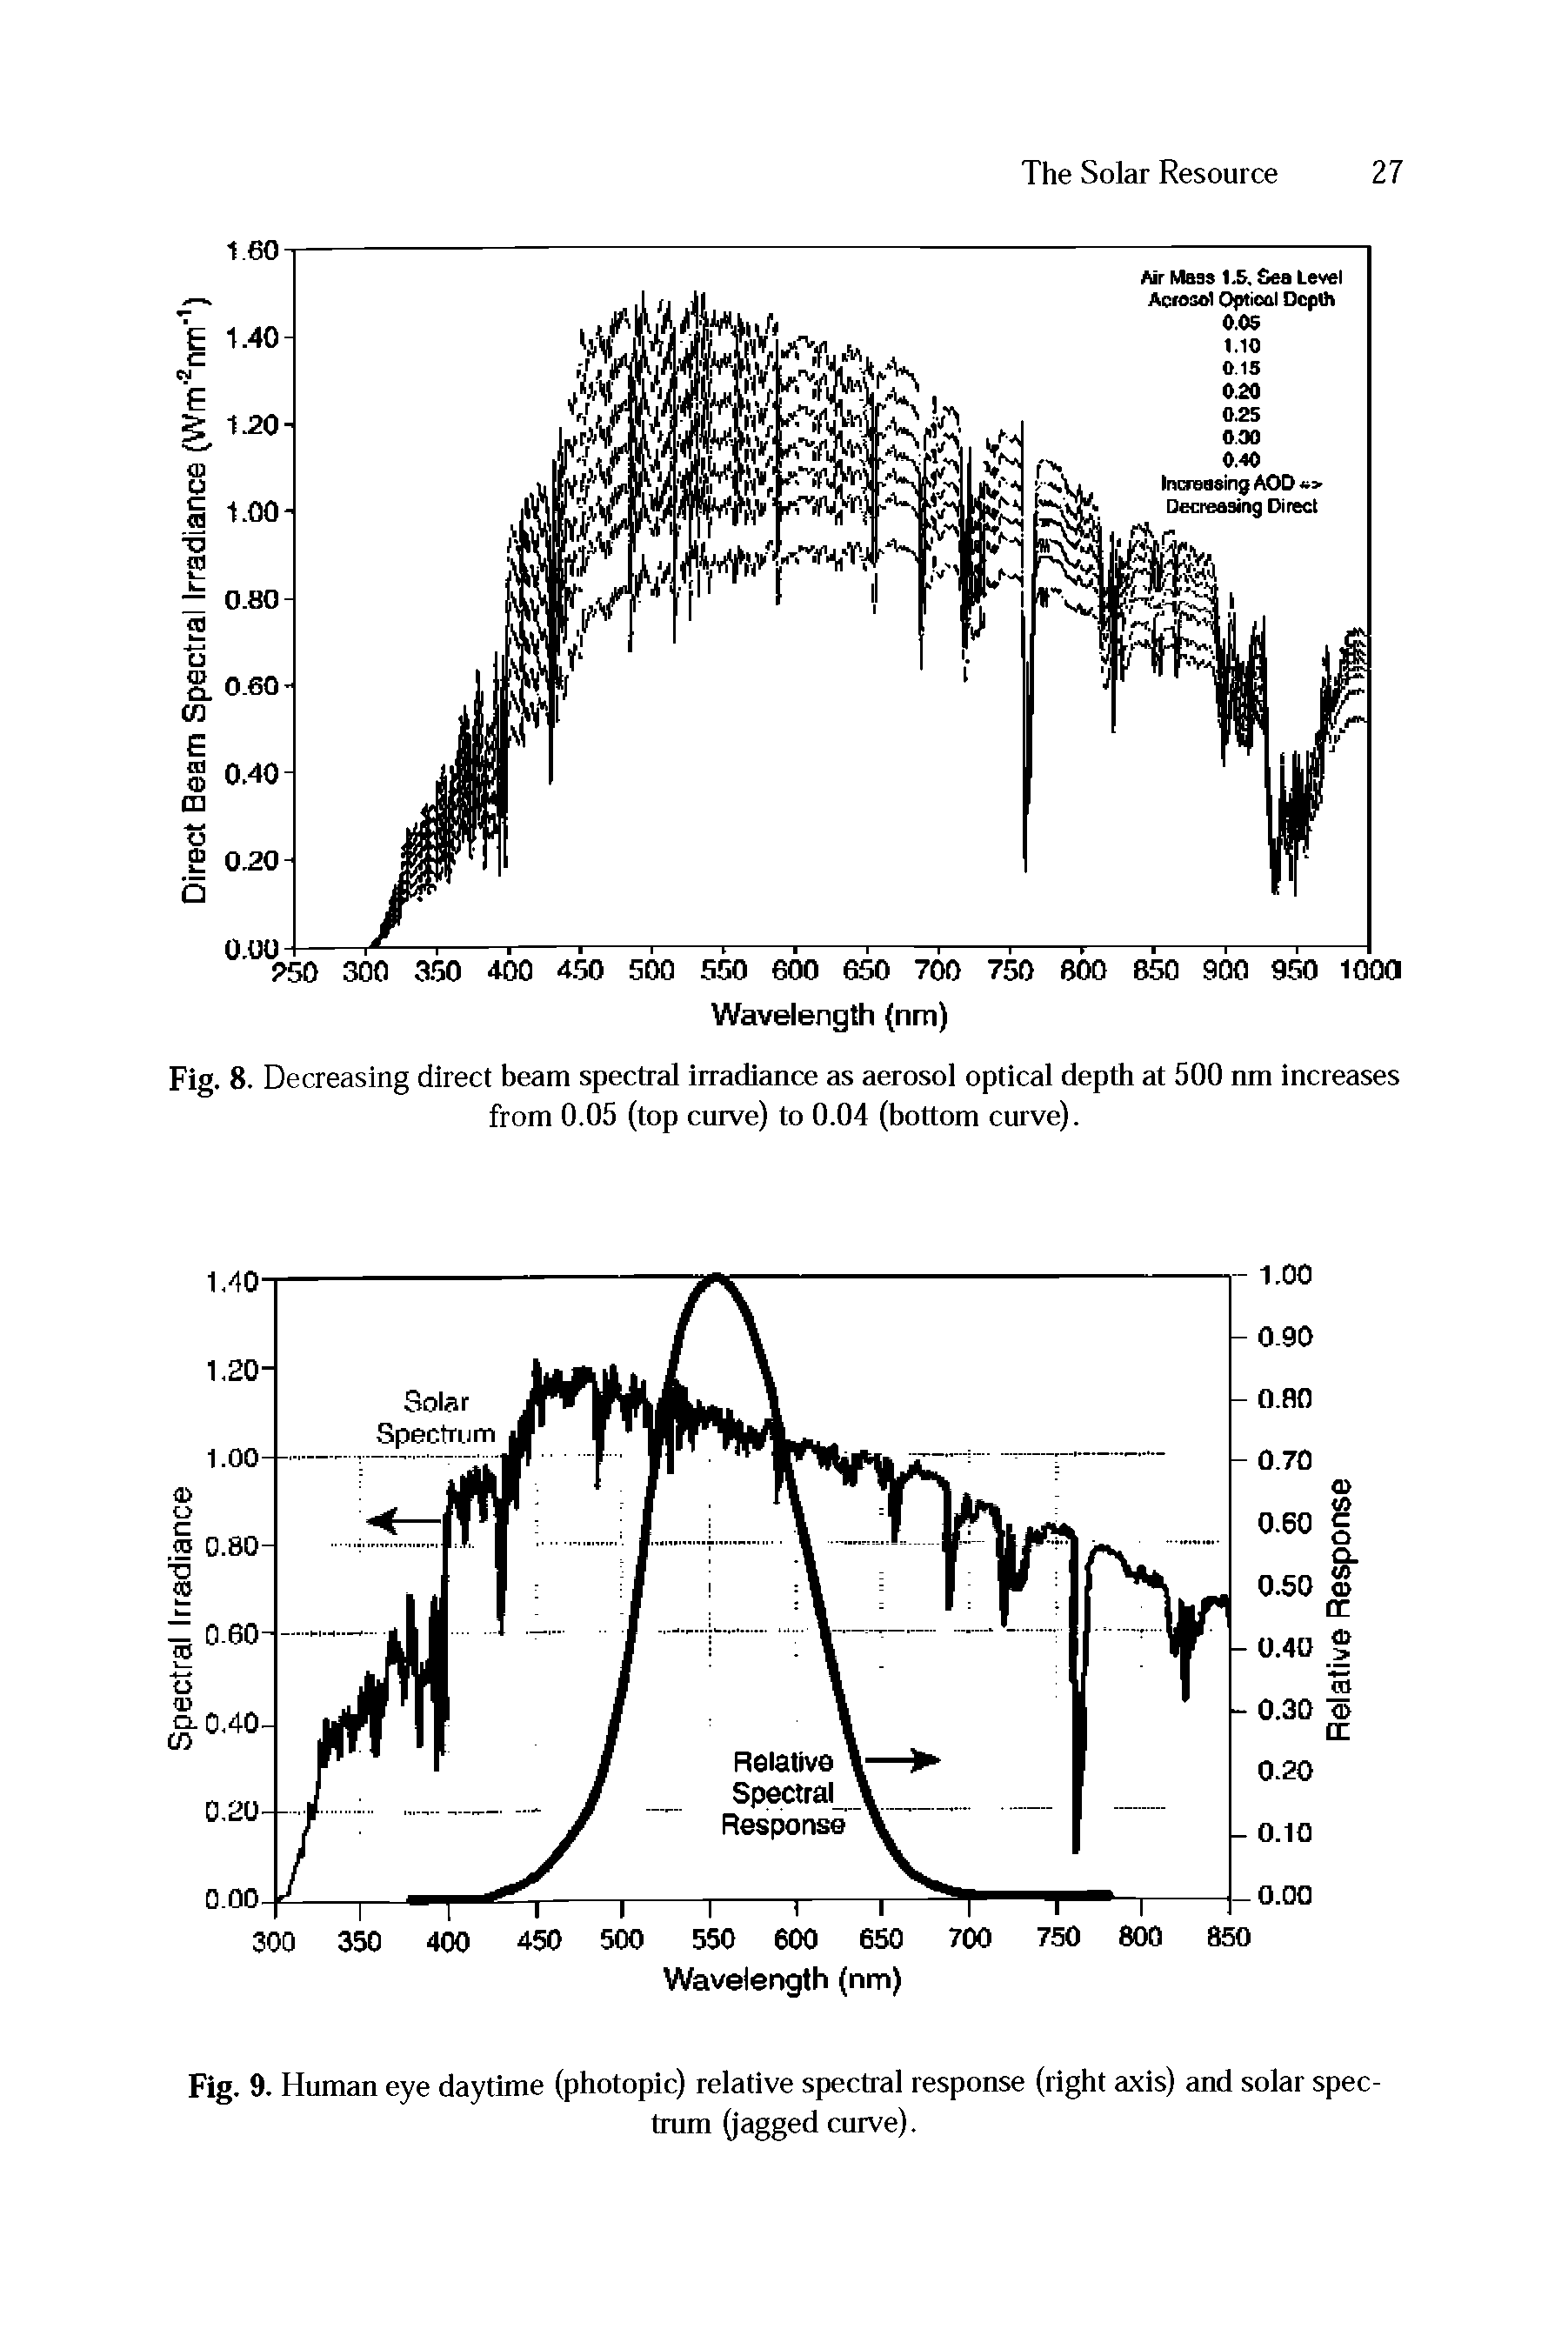 Fig. 8. Decreasing direct beam spectral irradiance as aerosol optical depth at 500 nm increases from 0.05 (top curve) to 0.04 (bottom curve).